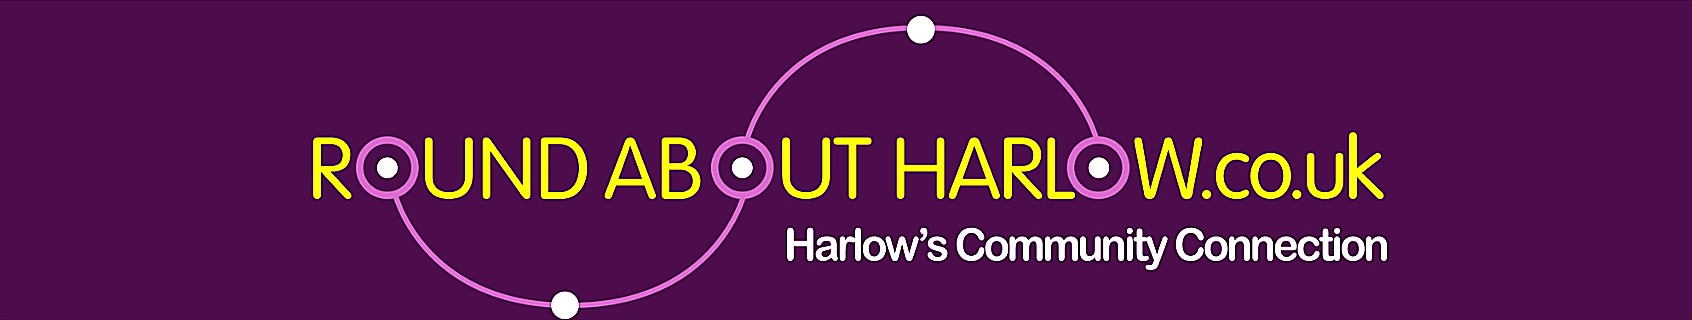 Round About Harlow